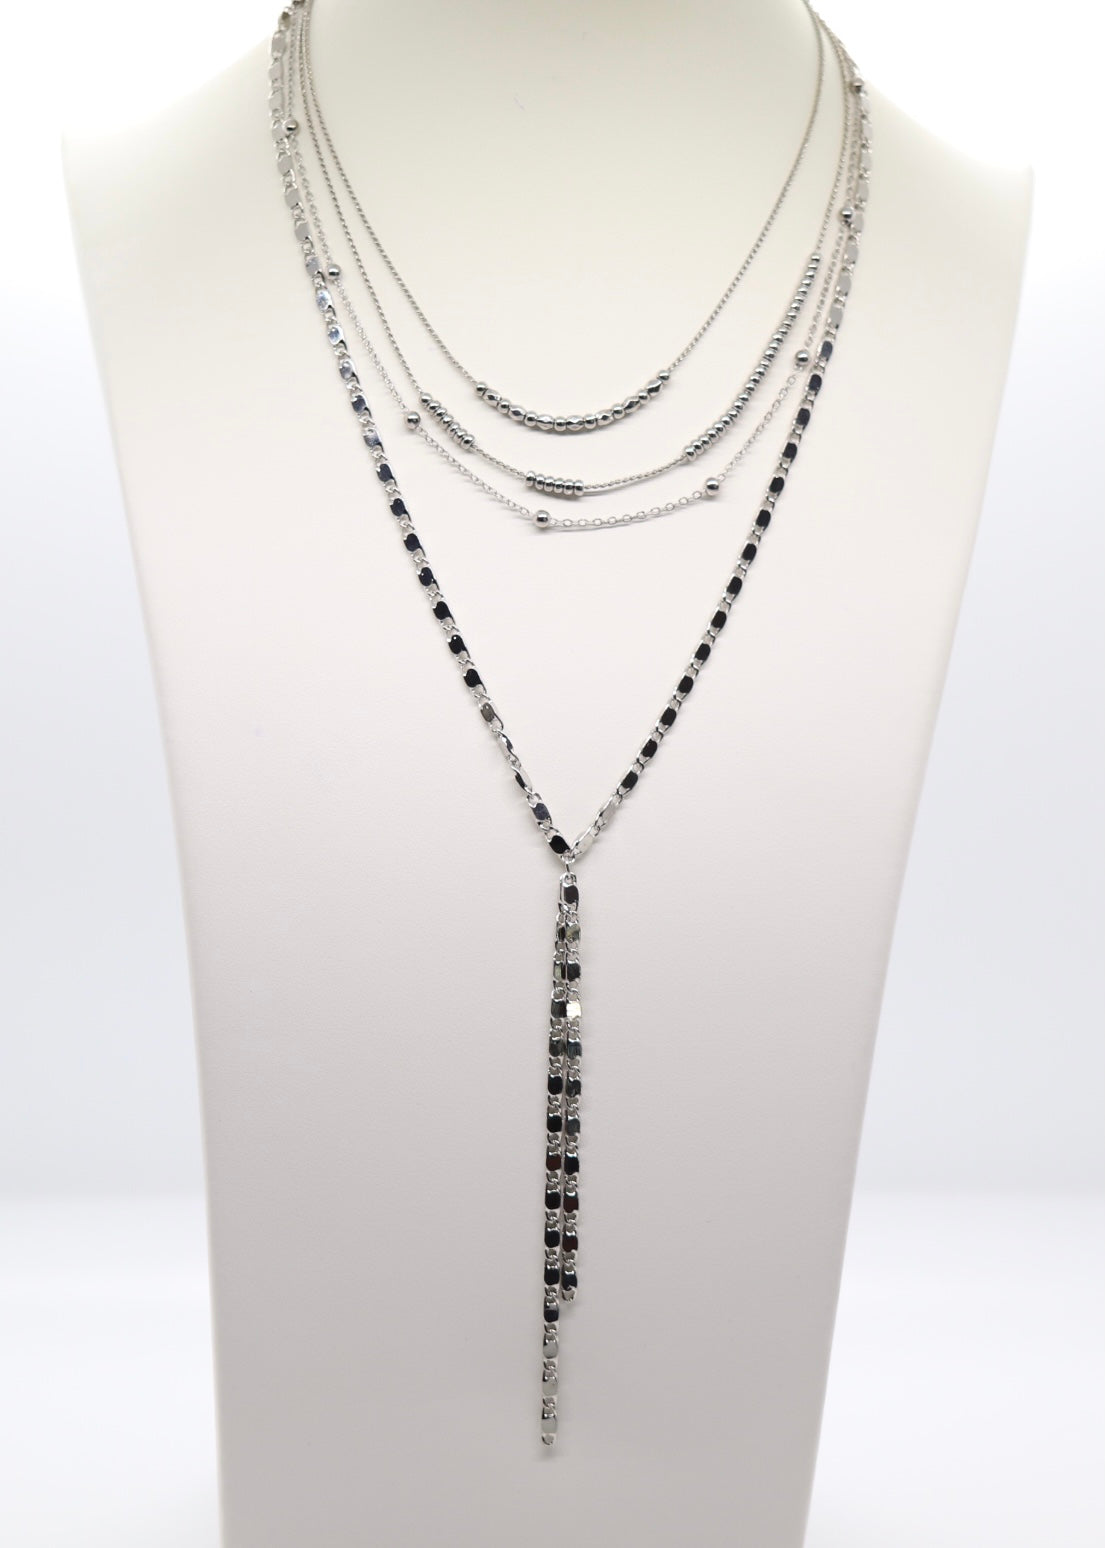 4 Layer Silver Beaded Necklace